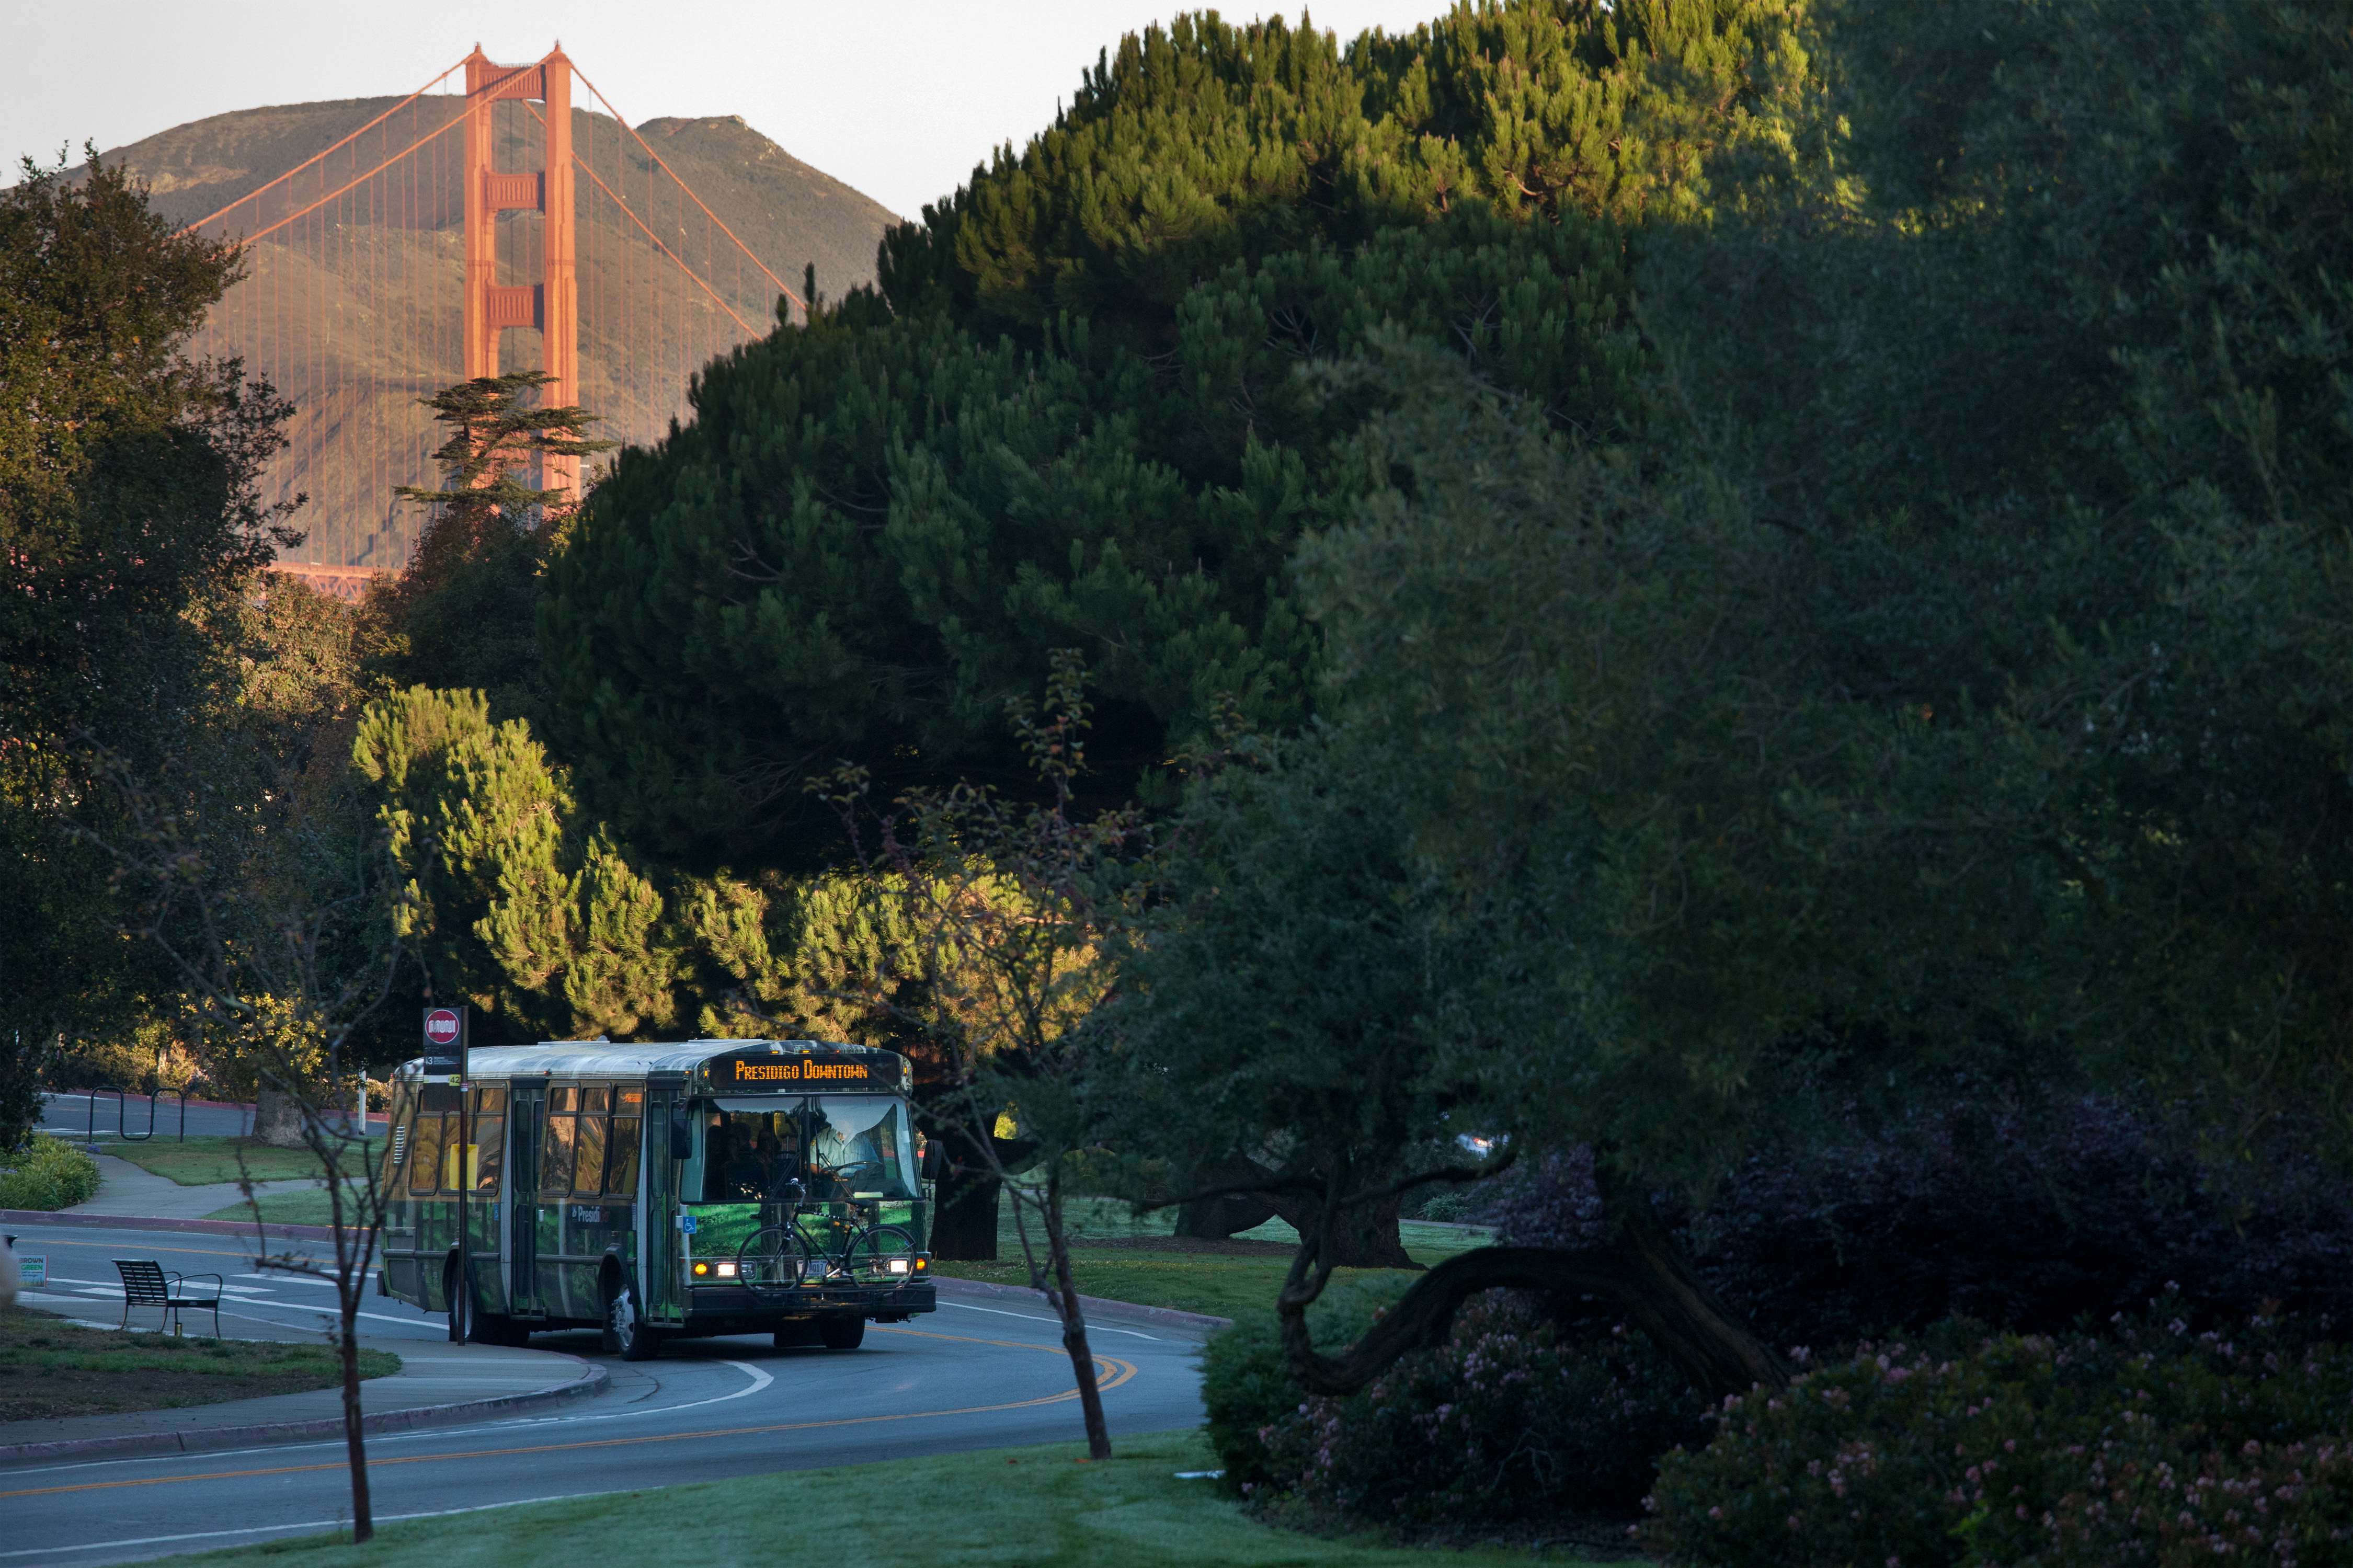 Image of Presidio GO Shuttle on the road with the Golden Gate Bridge in the background